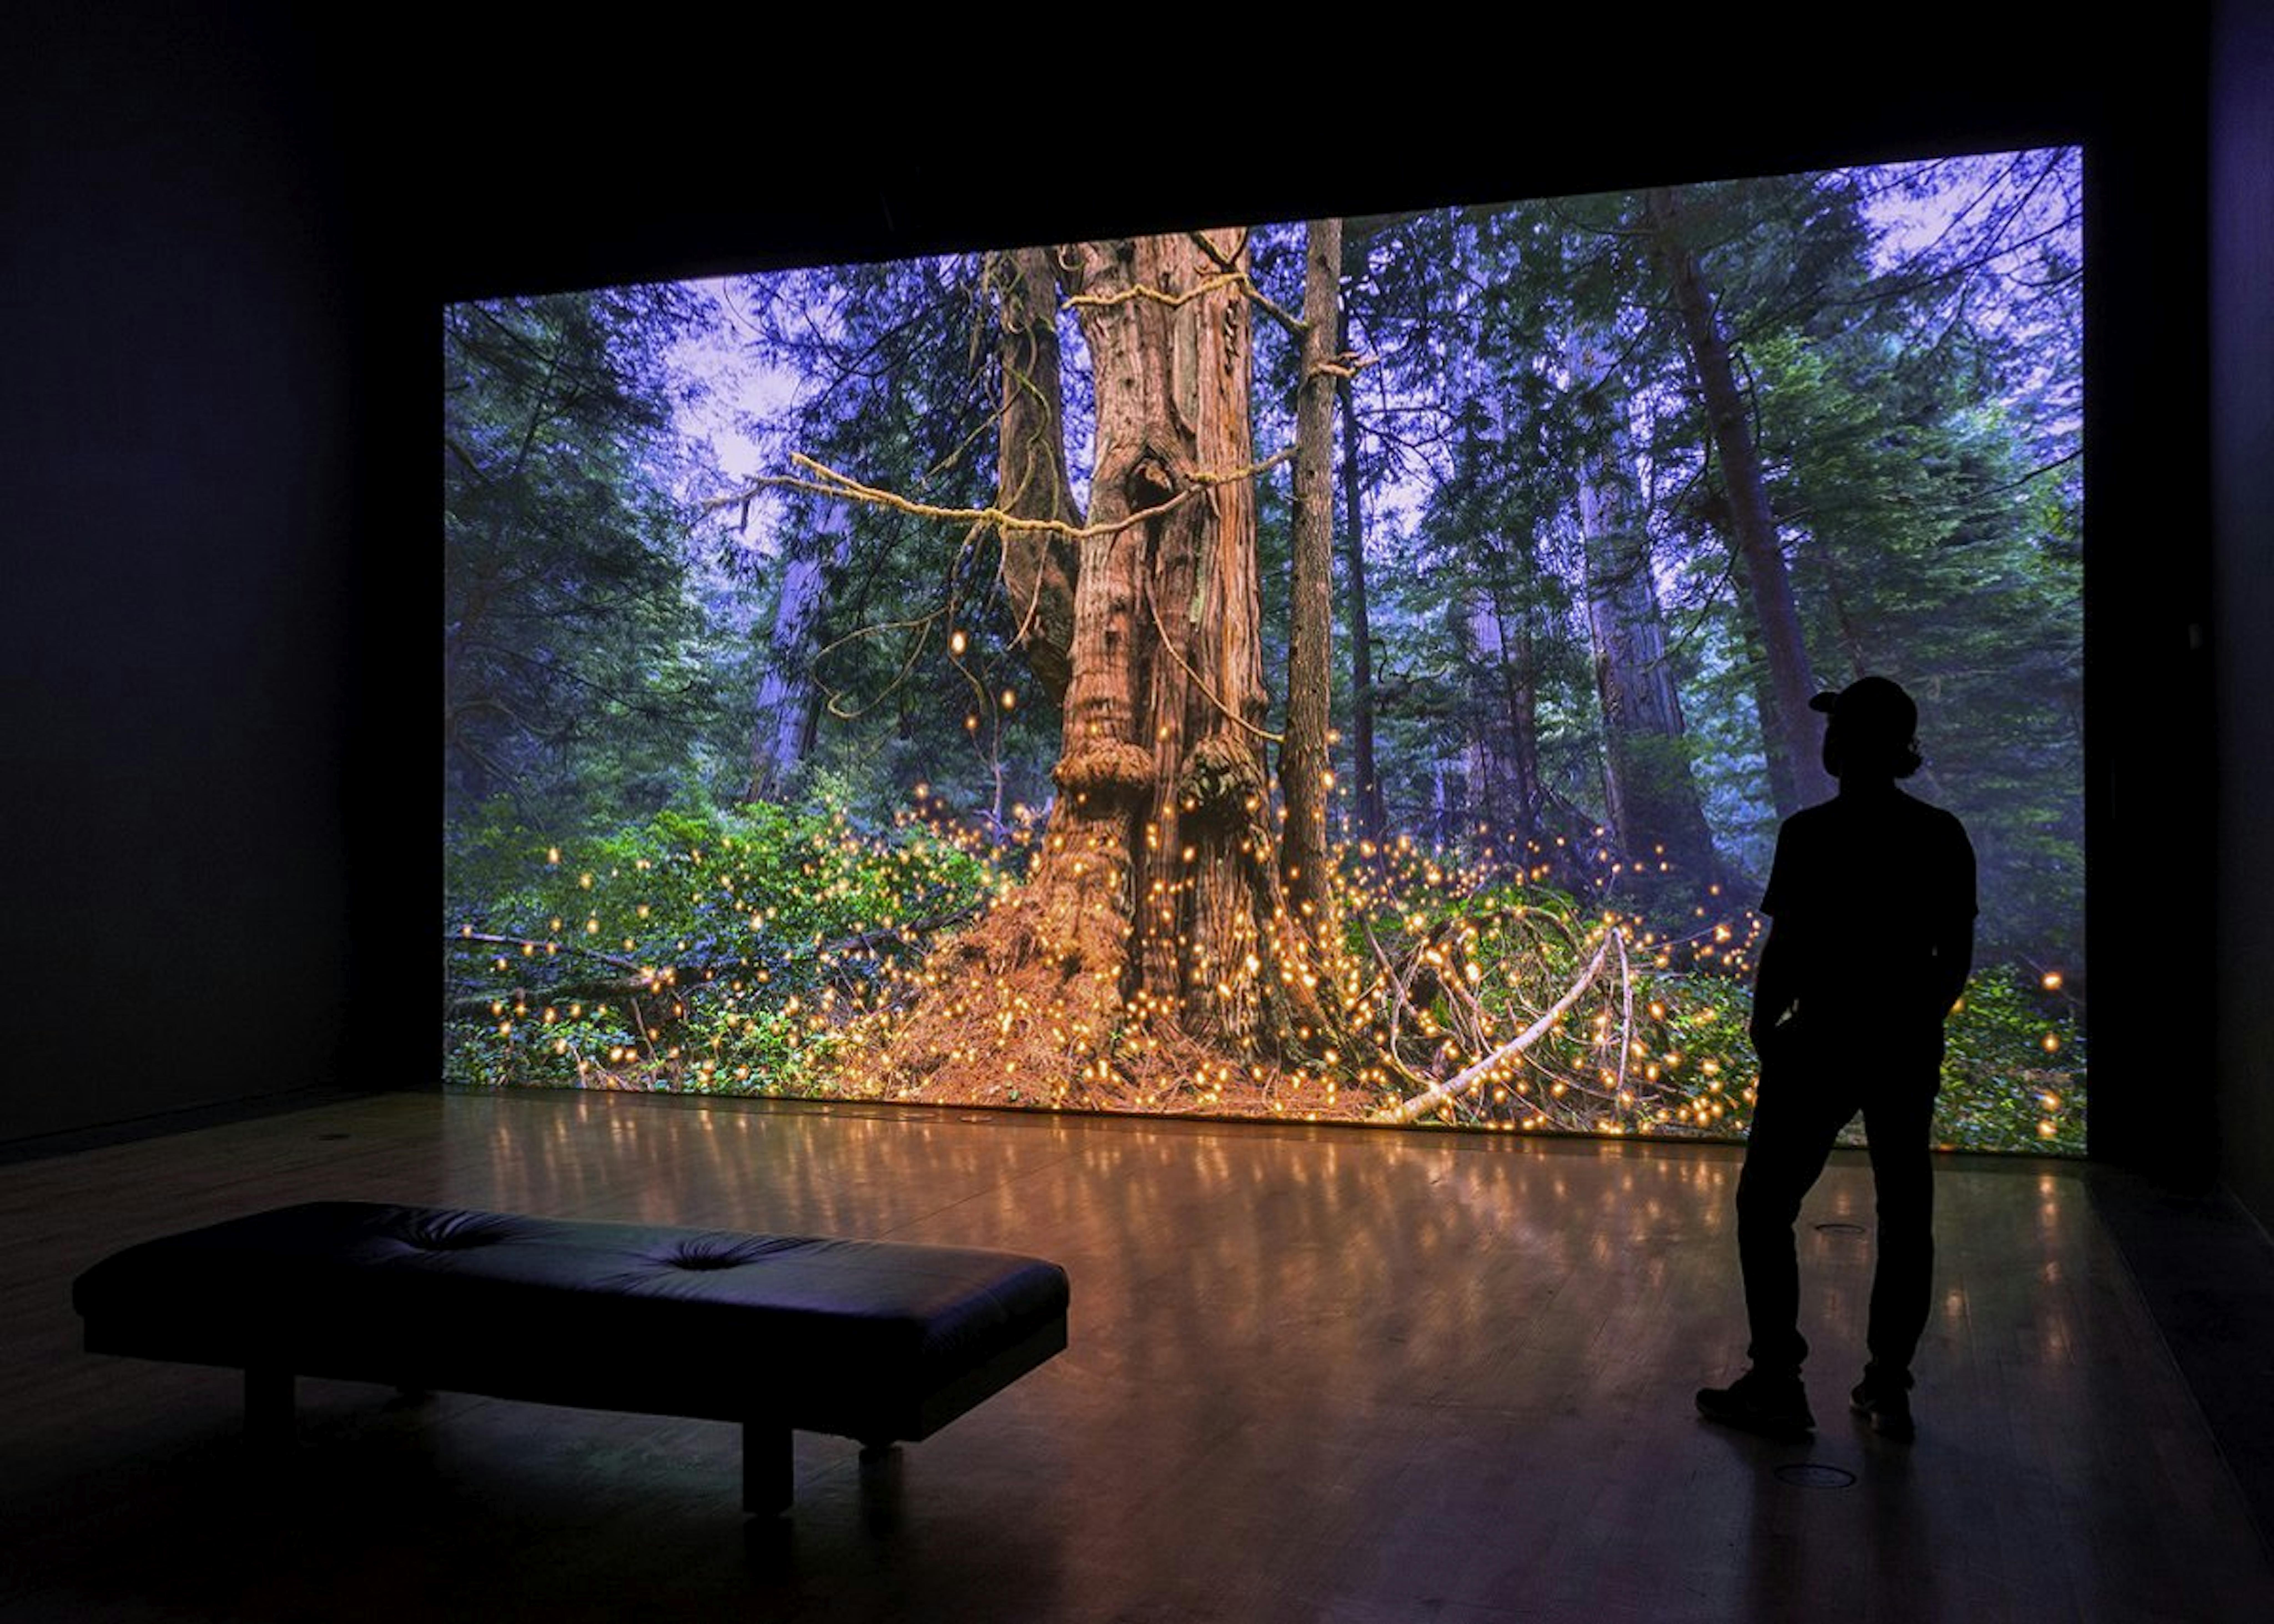 An installation of a film projected at scale. A figure in the foreground provides a sense of scale and is half of the size of the screen. The film depicts a large ancient tree surrounded by digital lights depicted in a rain forest just as the sun is setting. 